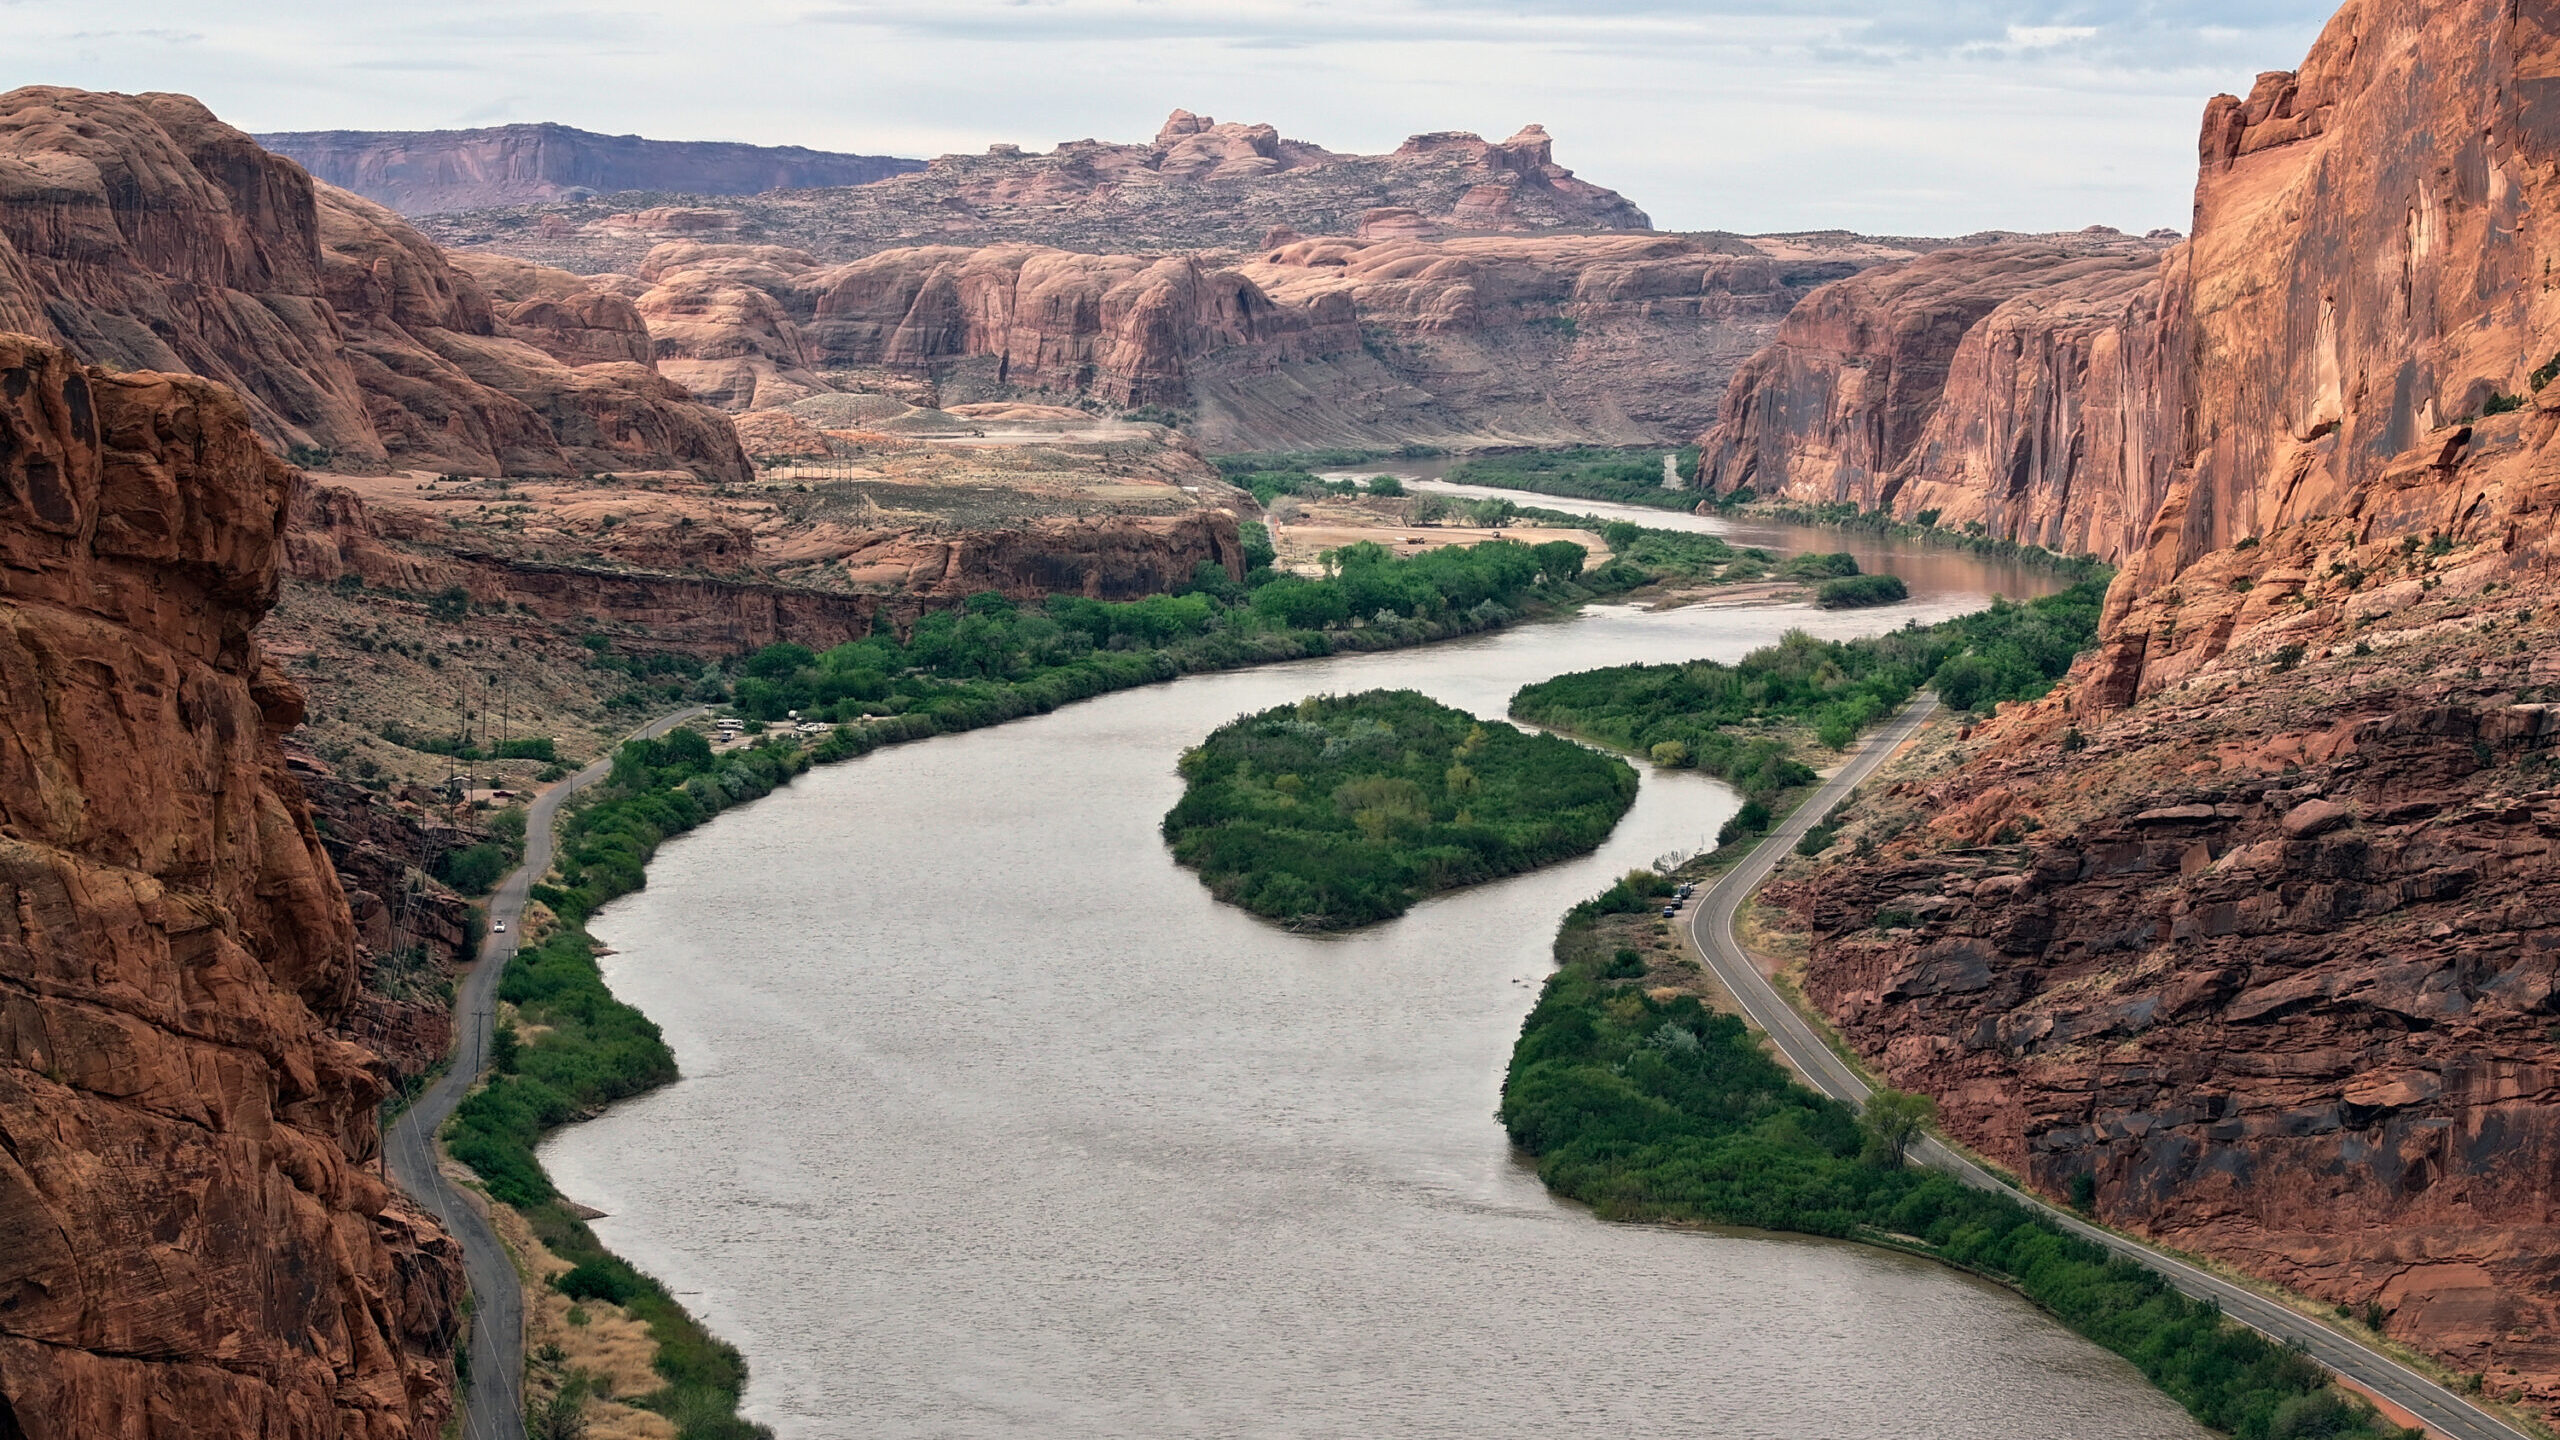 Can climate change add water to the Colorado River? [Video]